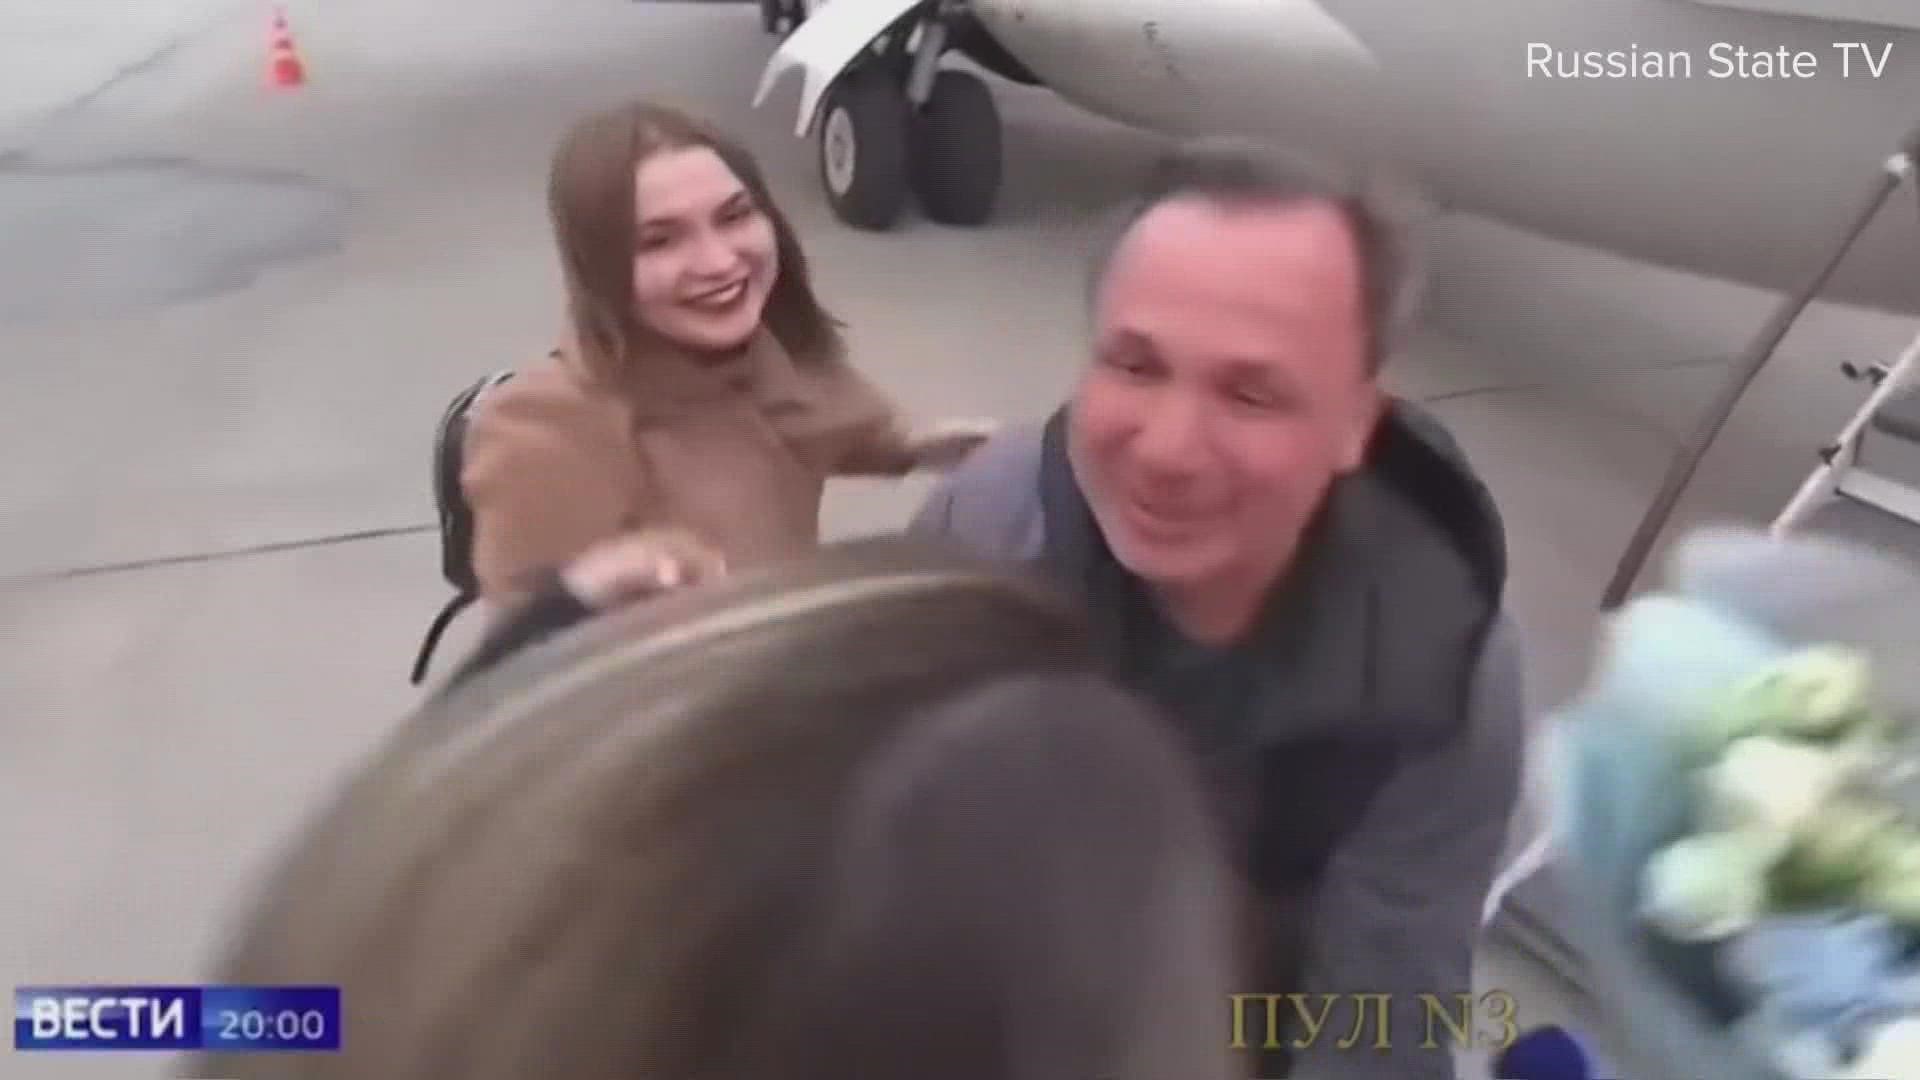 Trevor Reed was released from jail in Moscow after almost three years in captivity. Yaroshenko is being brought back to Russia after a 20-year sentence in the U.S.